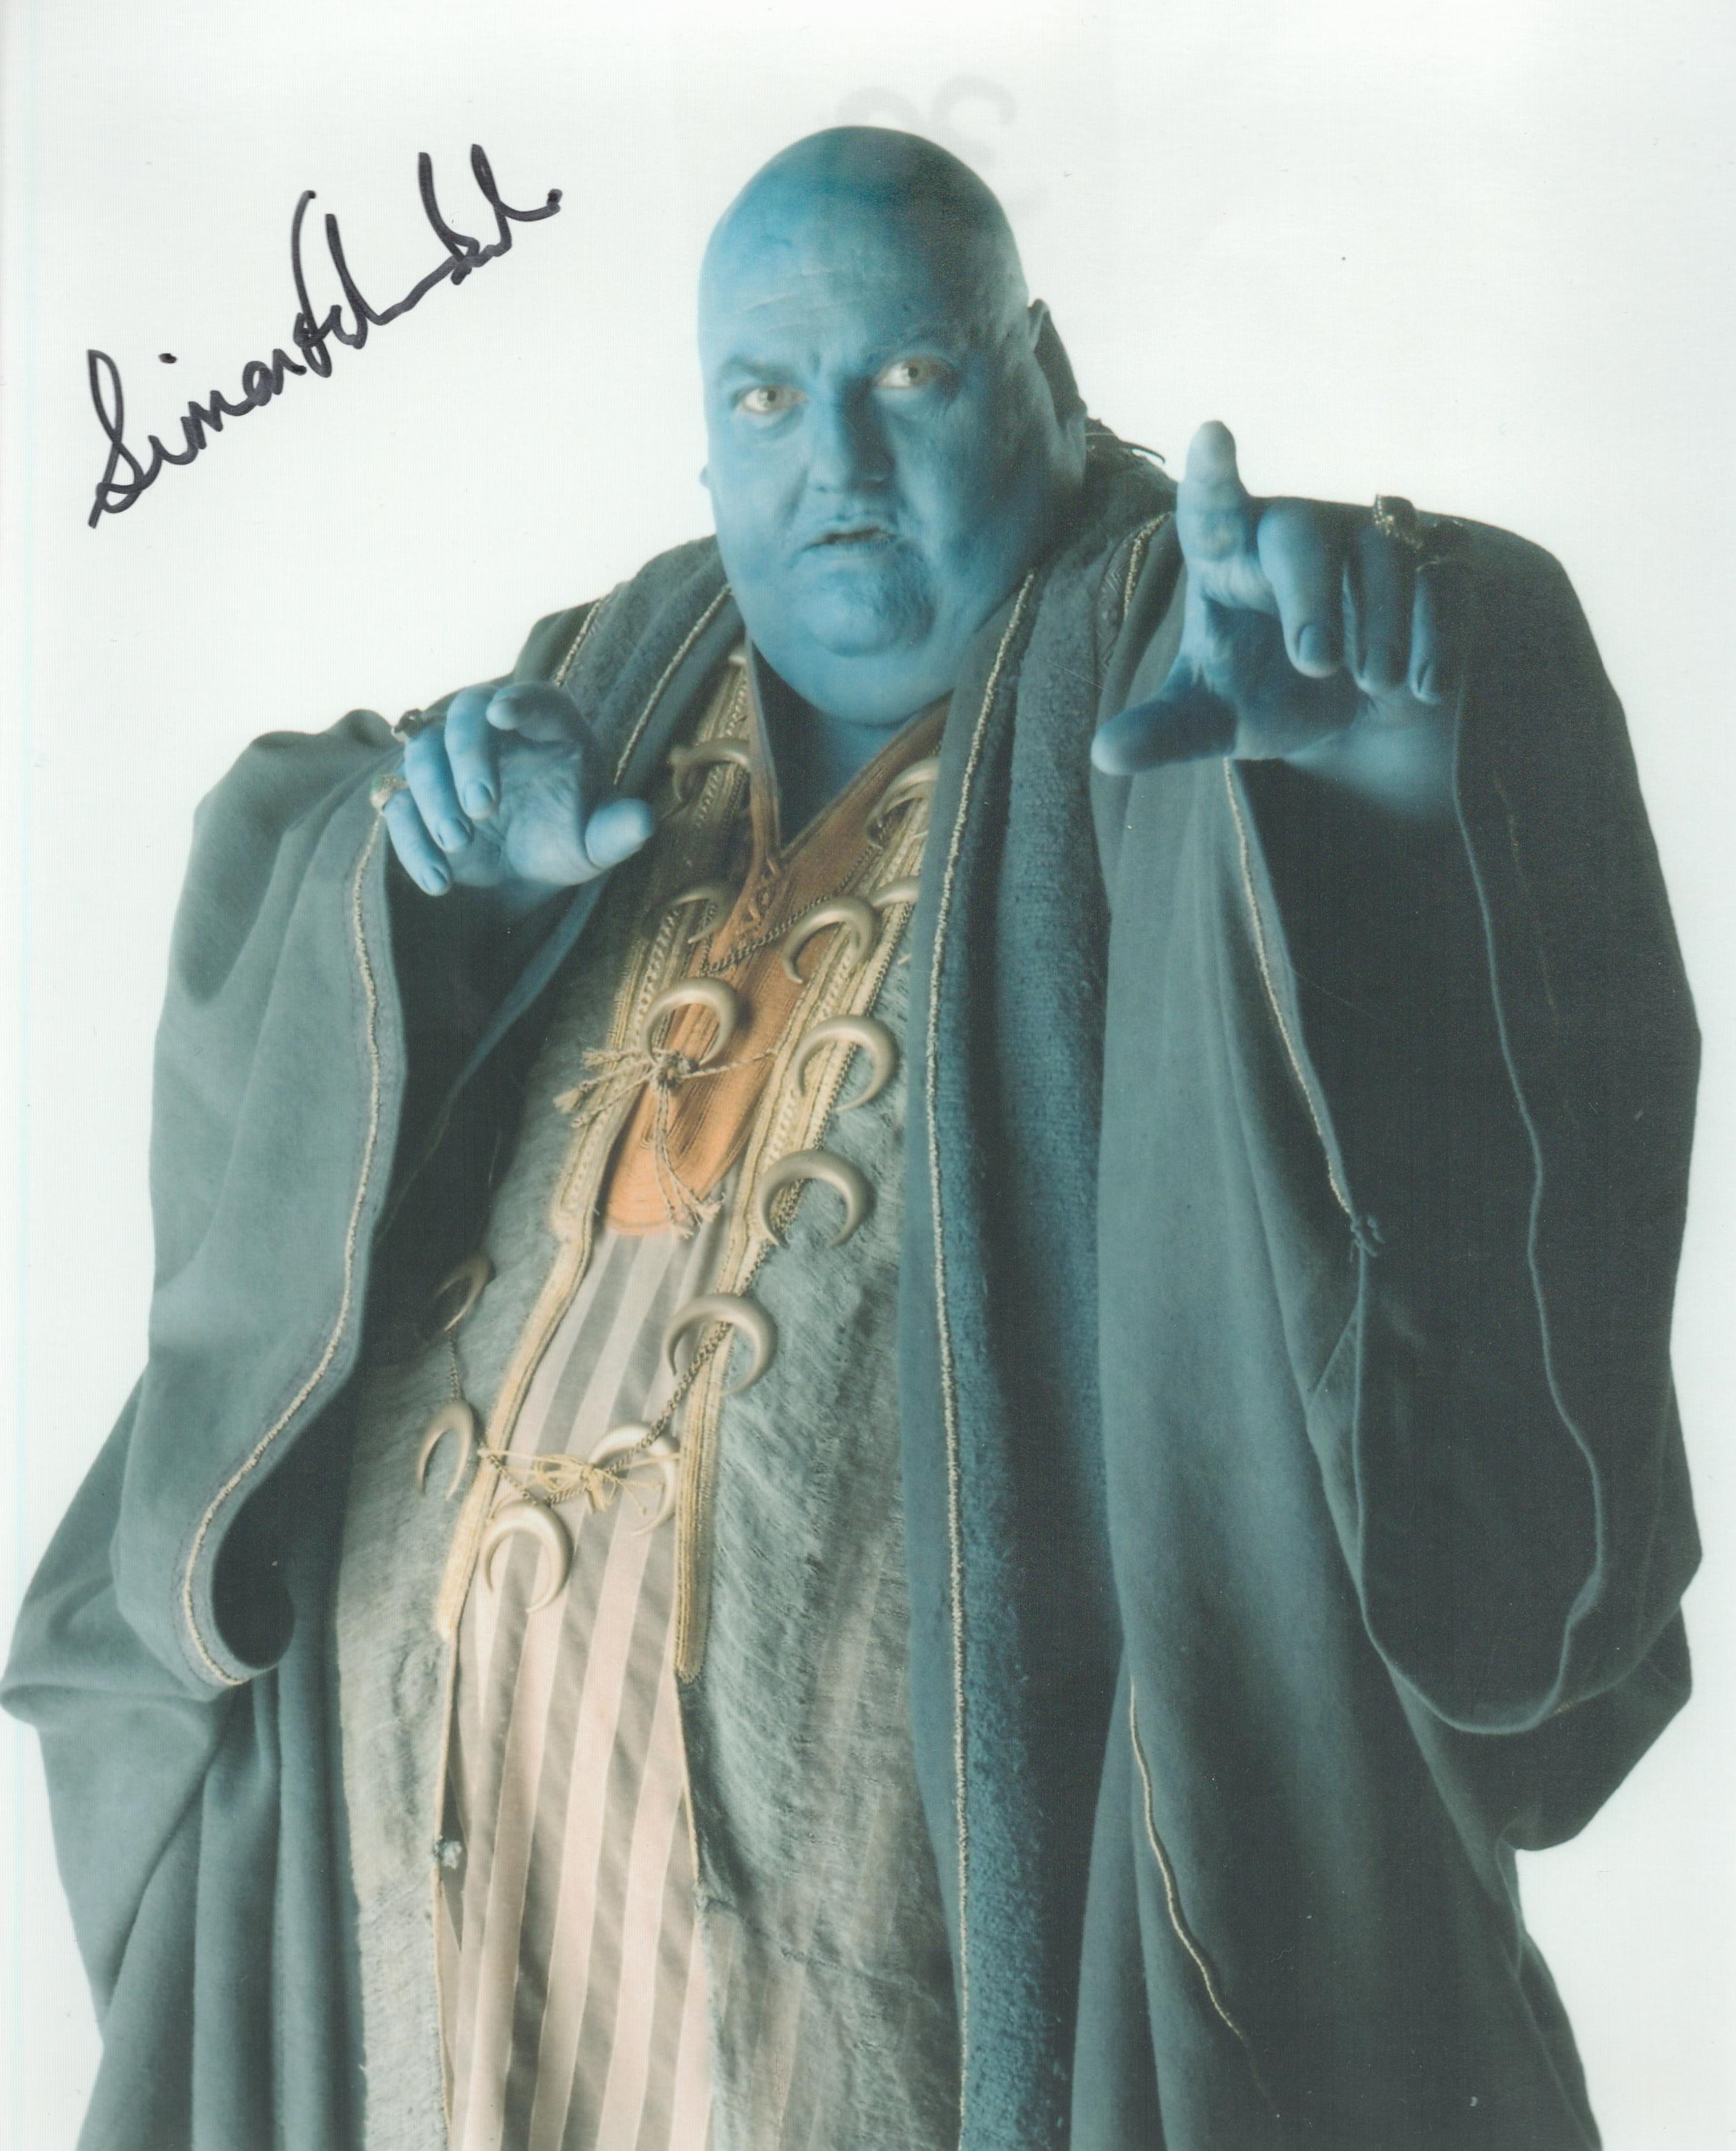 Simon Fisher Becker signed 10x8 inch Doctor Who colour photo. Good condition. All autographs come